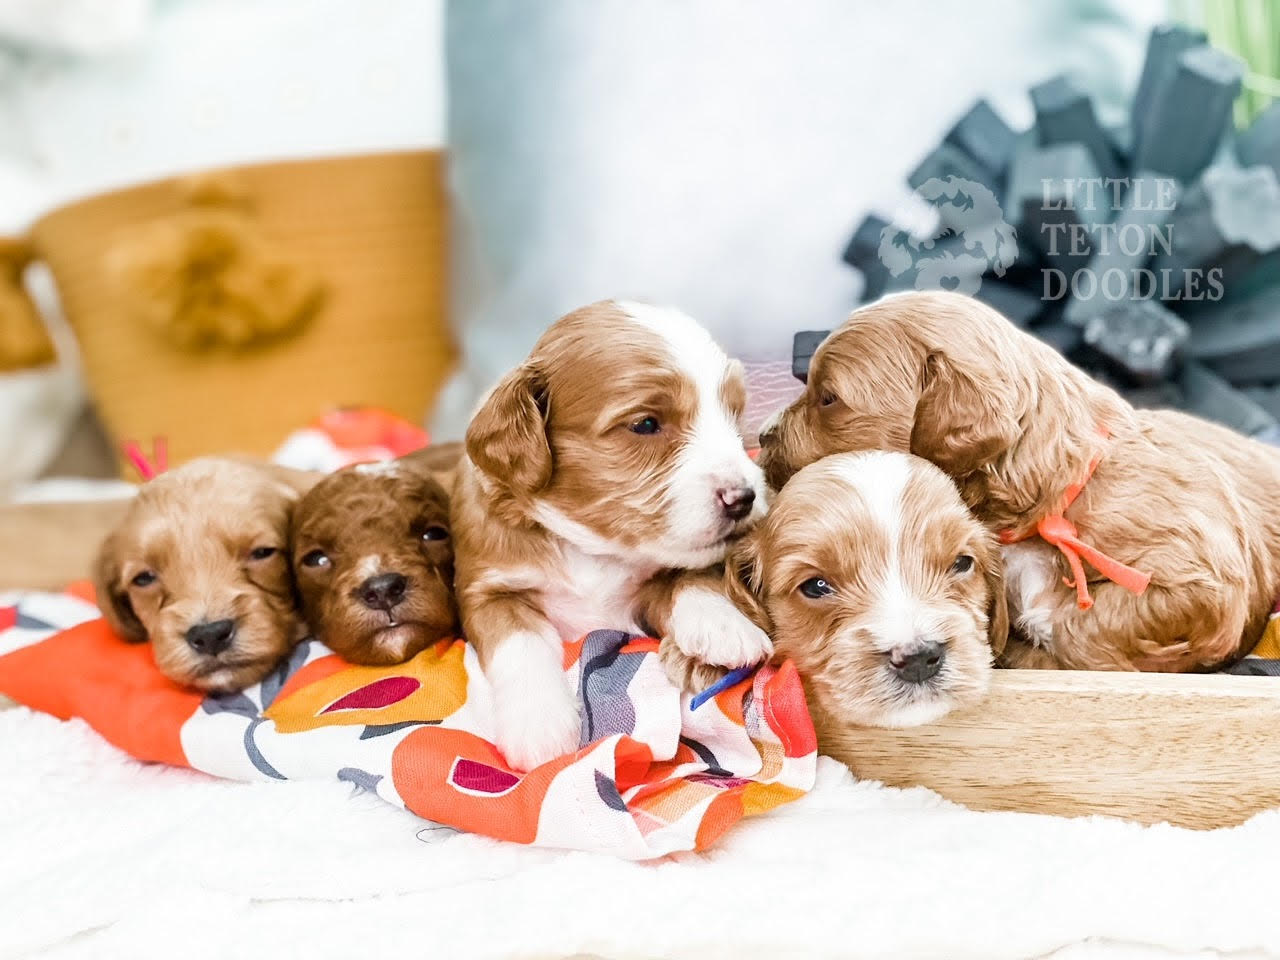 A quartet of playful puppies are nestled in a rustic wooden box, their fluffy coats on full display.